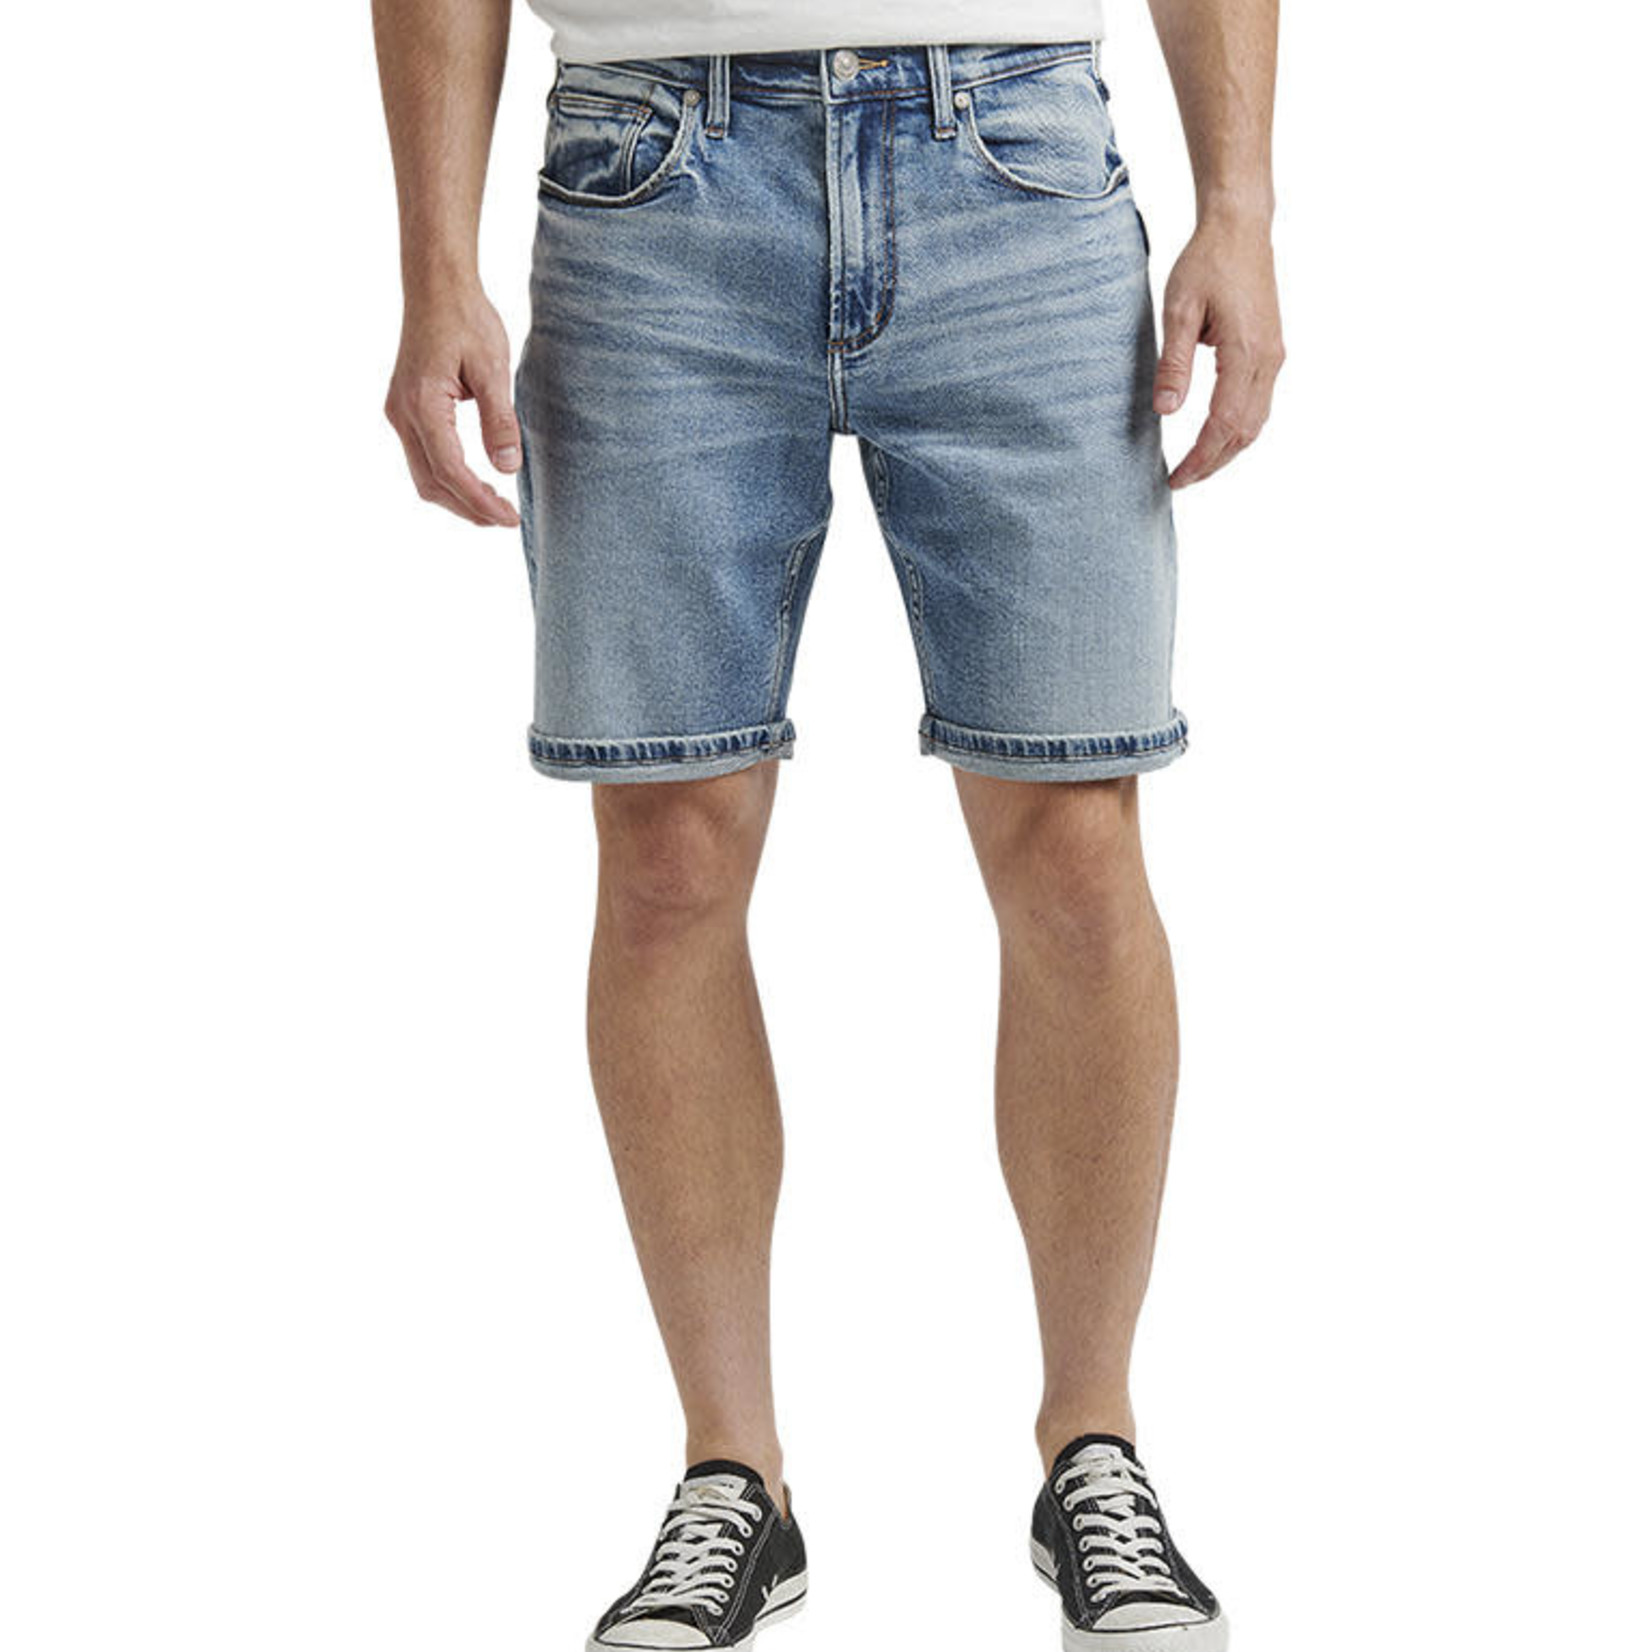 Silver Jeans Machray Classic Fit Jean Short